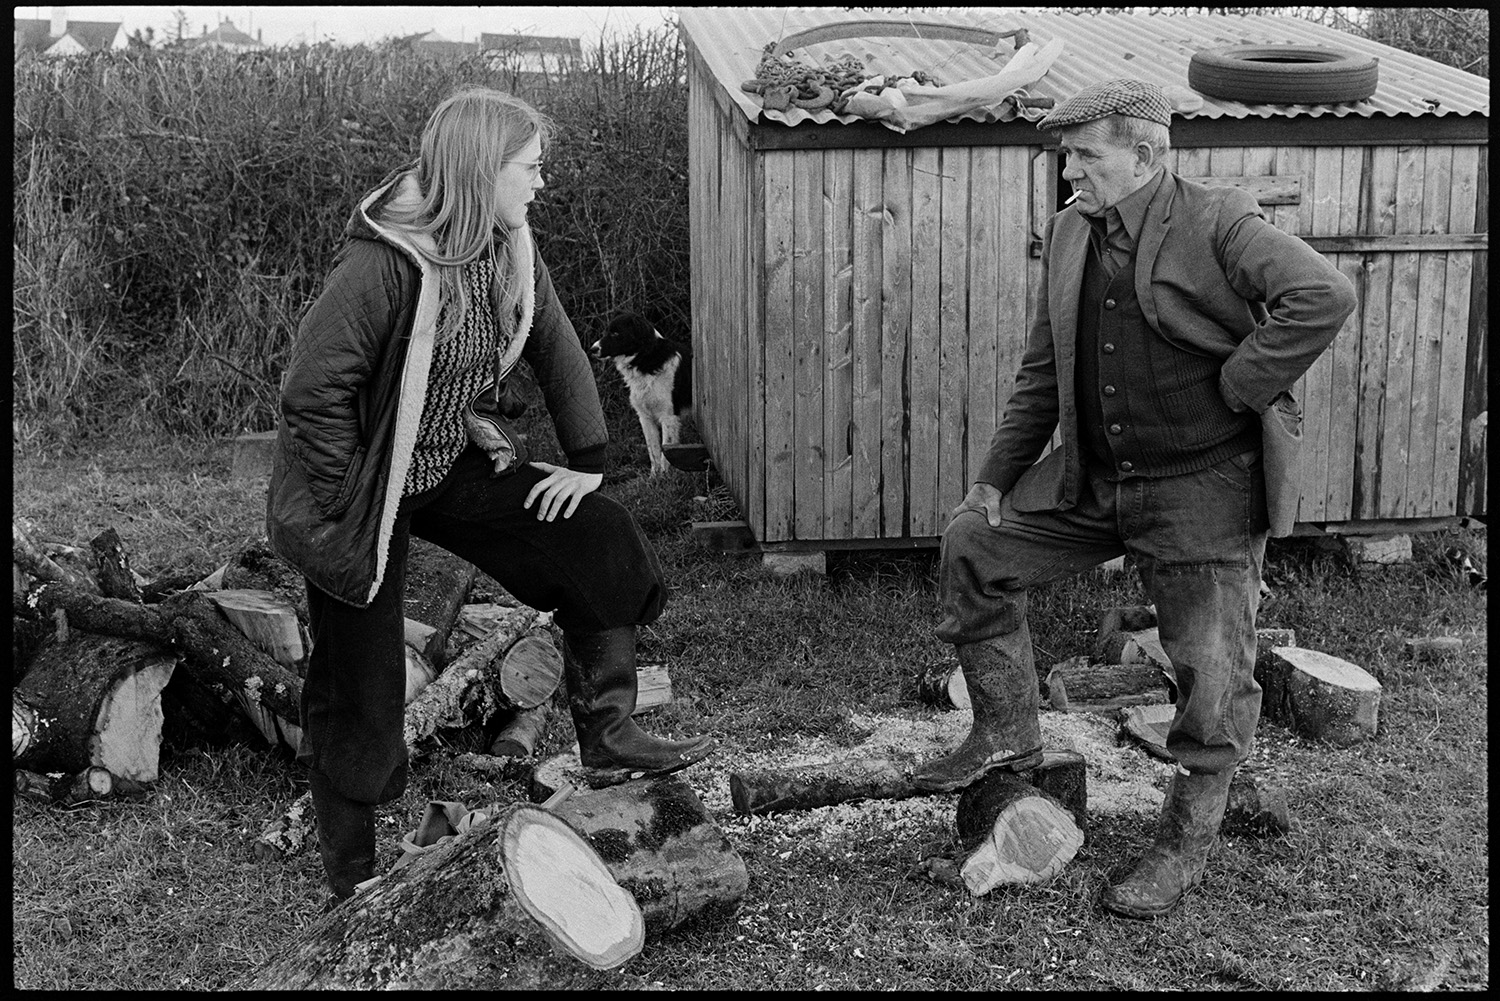 Farmer talking to girl in field with logs. 
[Frank Pickard talking to Frances Whistler by a log pile in a field at Dolton. He is smoking a cigarette. A wooden shed with a corrugated iron roof and a dog can be seen in the background.]